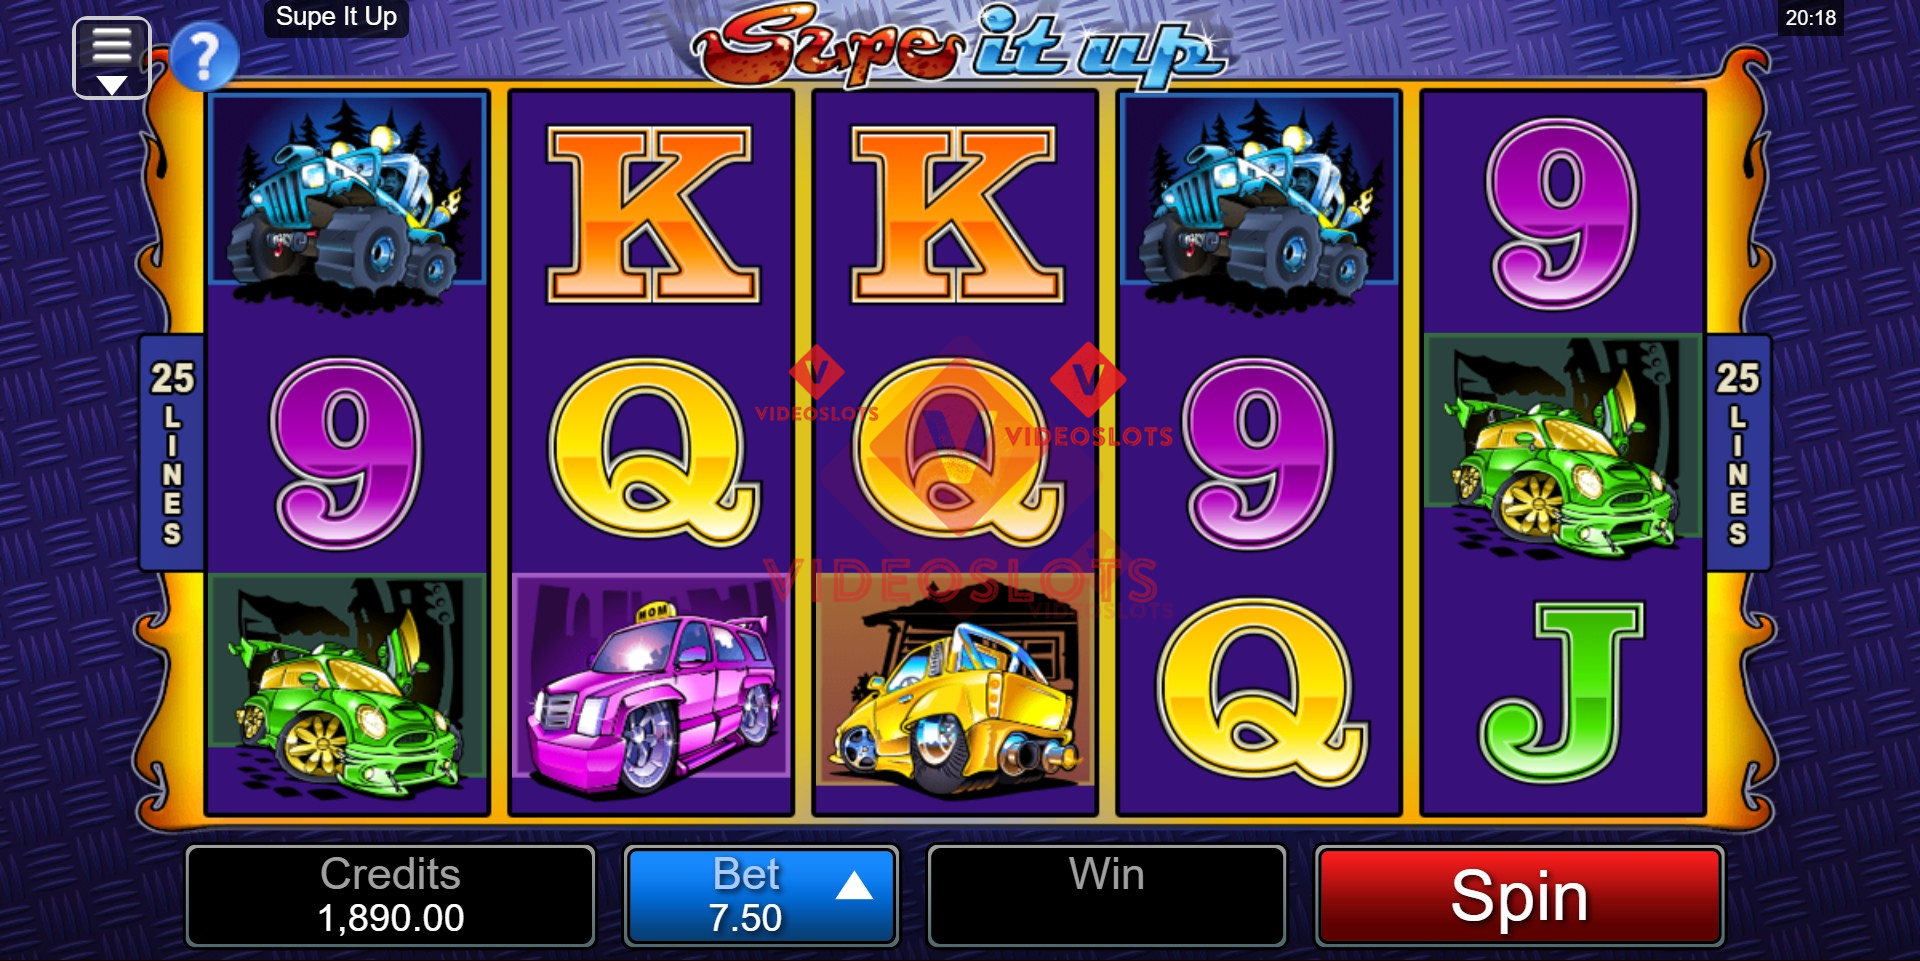 Base Game for Supe It Up slot for Microgaming